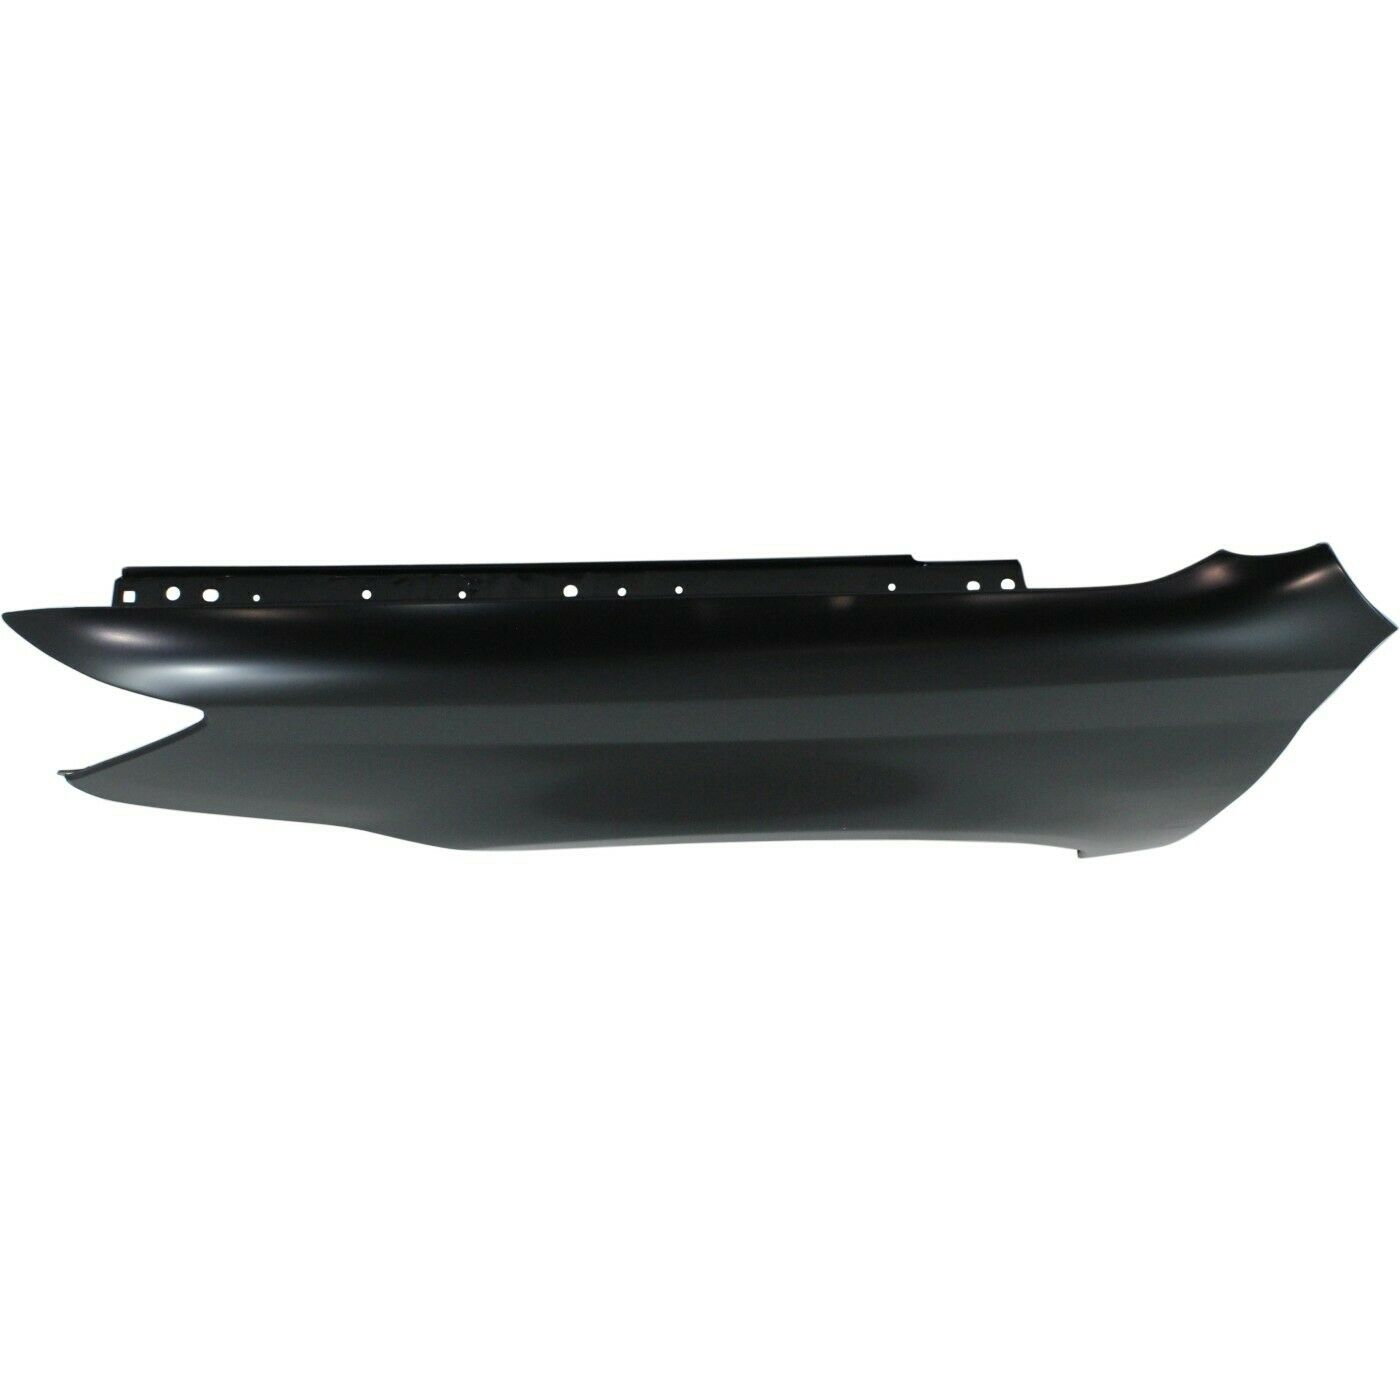 Toyota Avalon 2005 - 2010 Driver Side Fender 05 - 10 TO1240207 Bumper-King